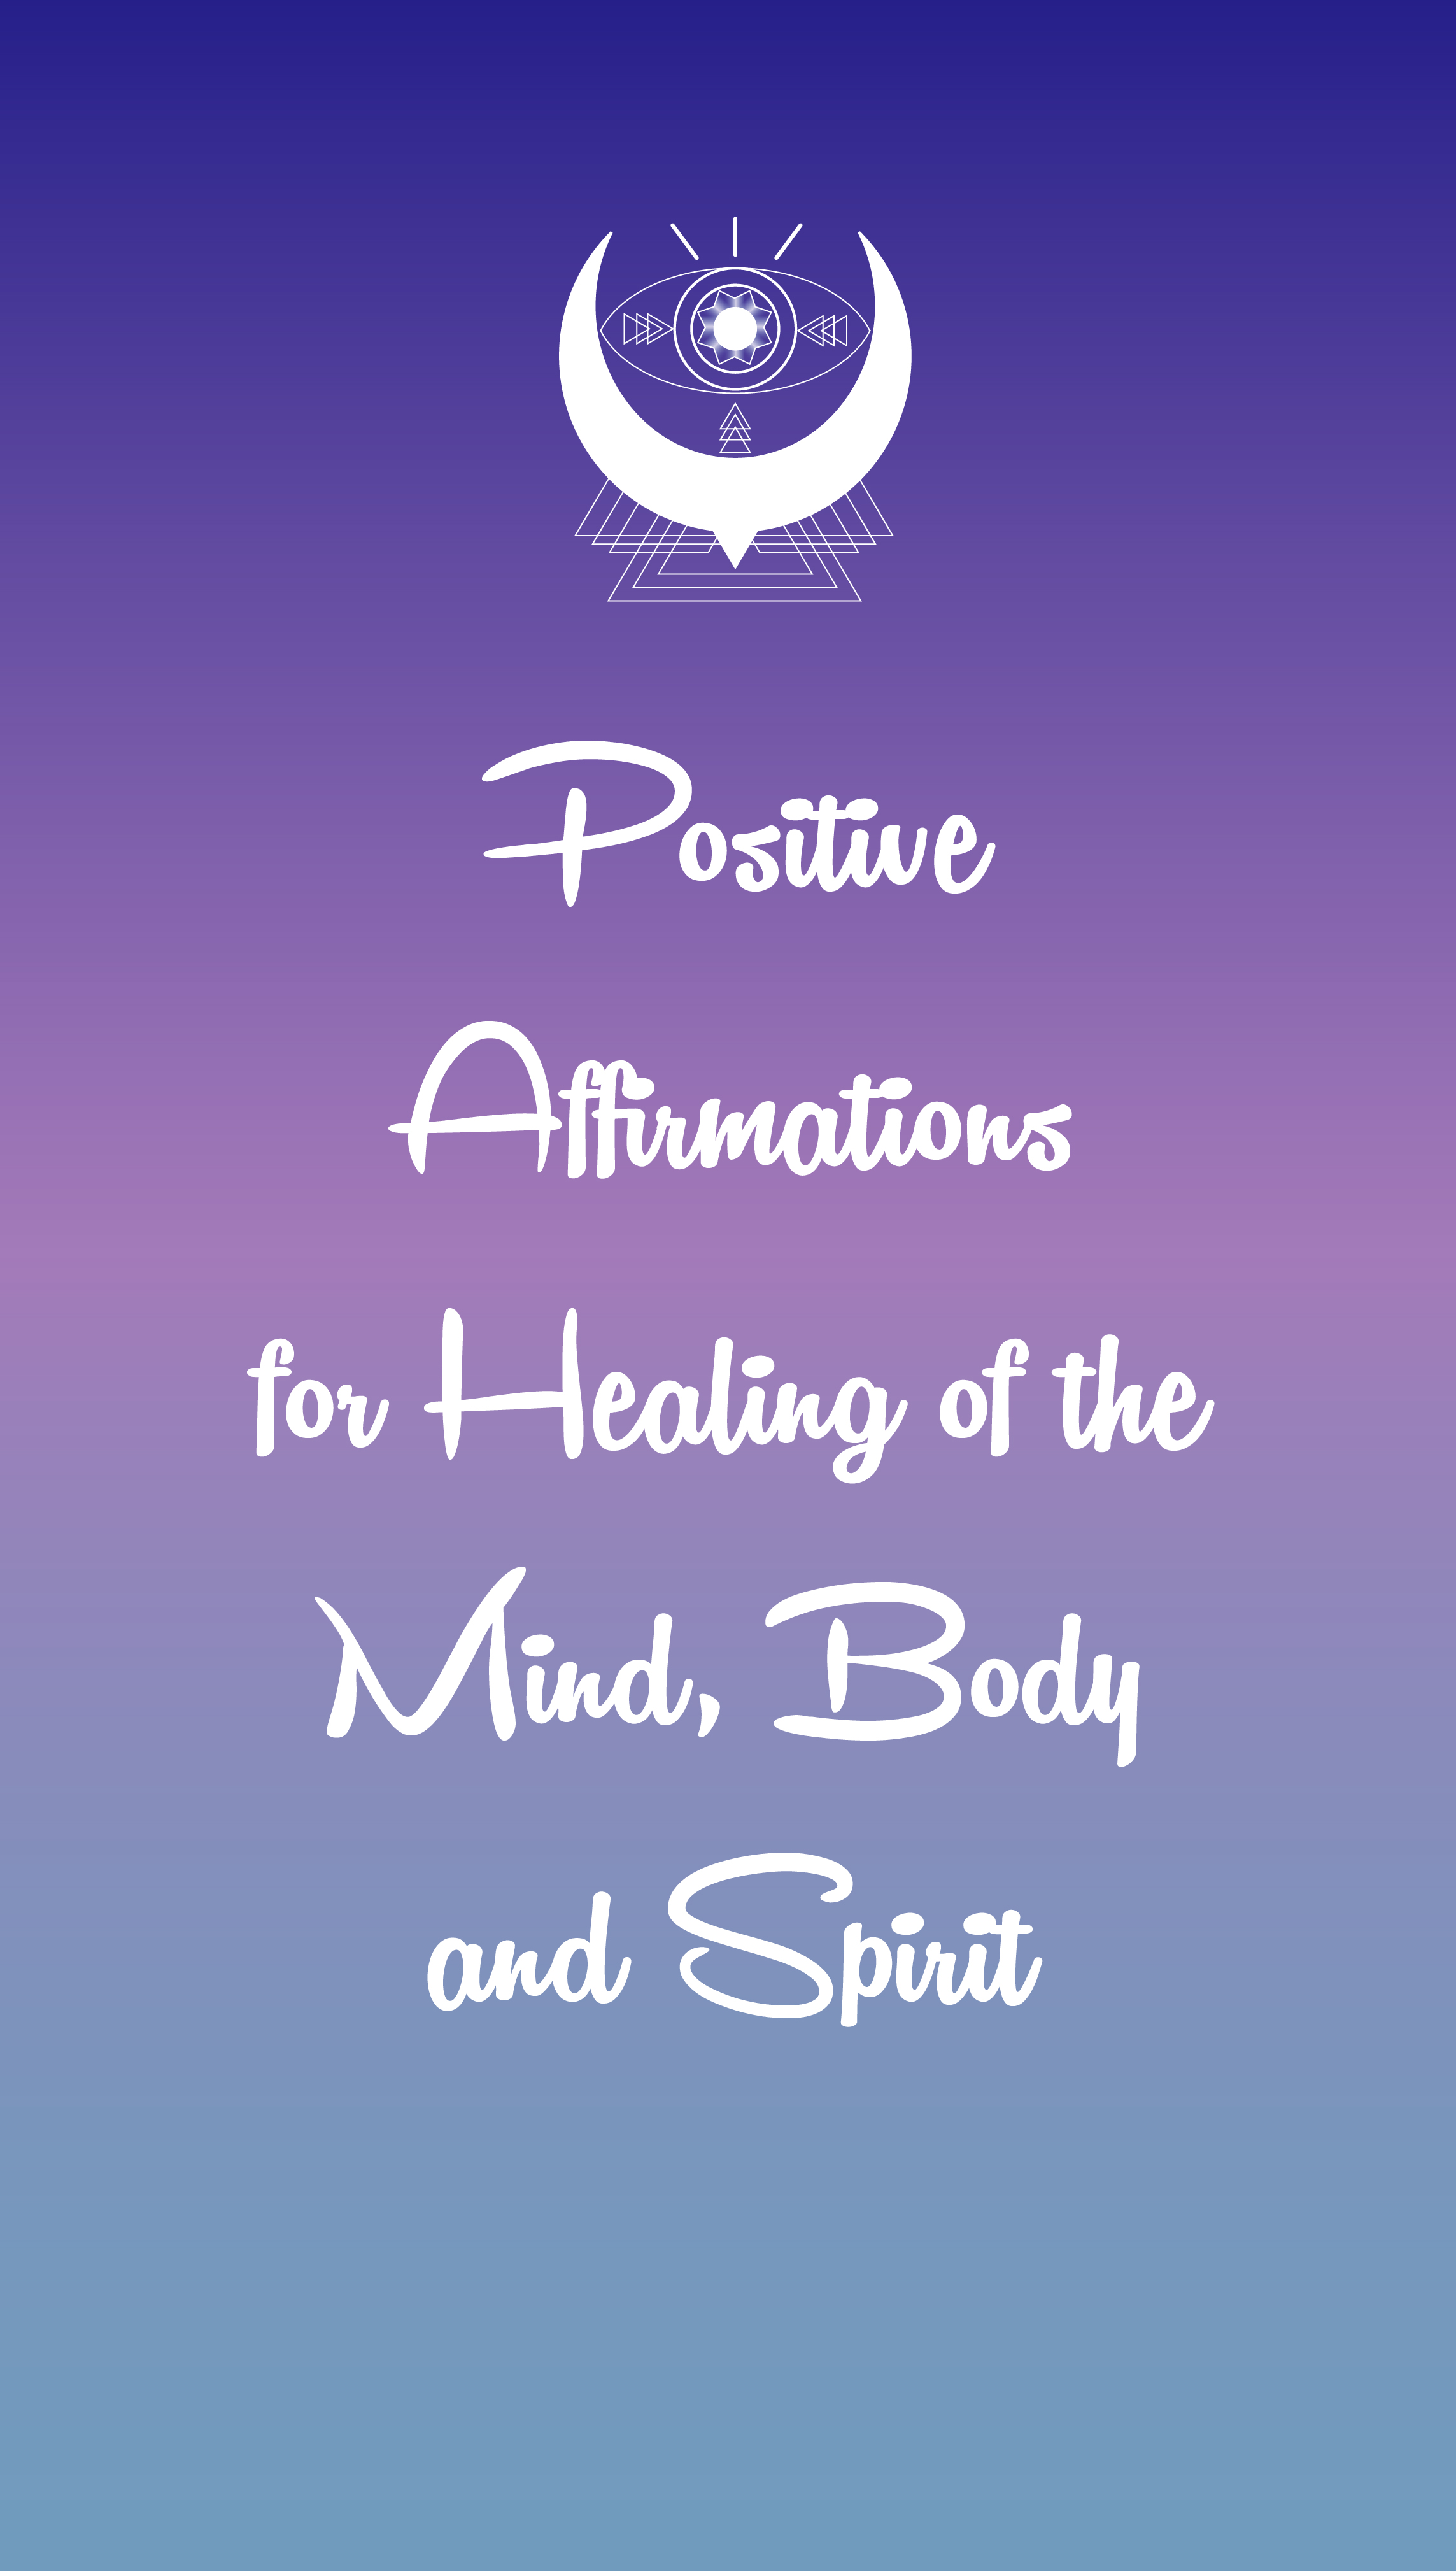 Positive Affirmations for Healing of the Mind, Body, and Spirit